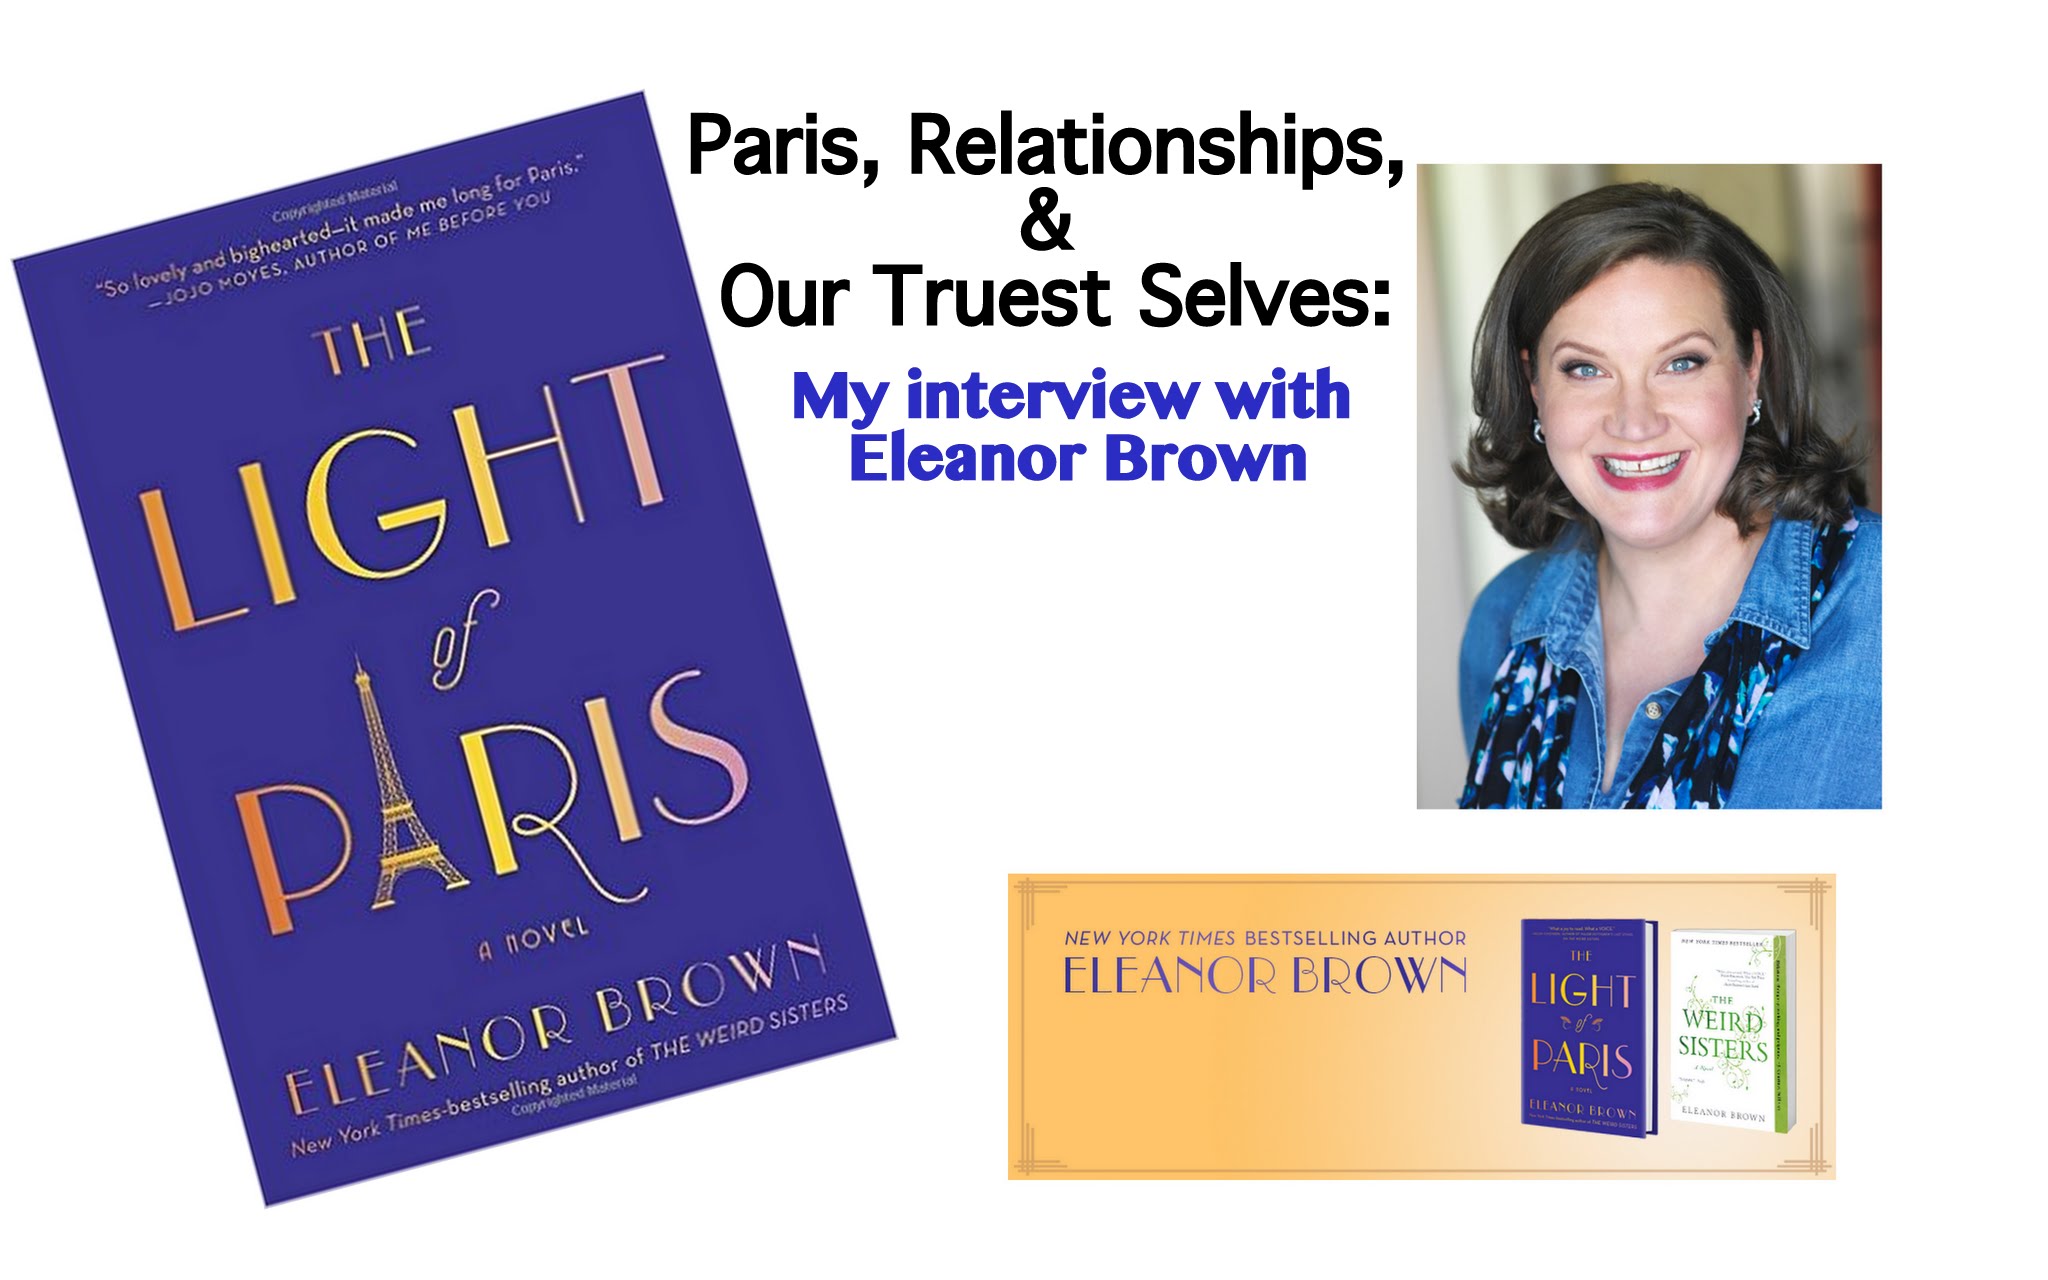 Paris, Relationships & Our Truest Selves: My Interview with Eleanor Brown